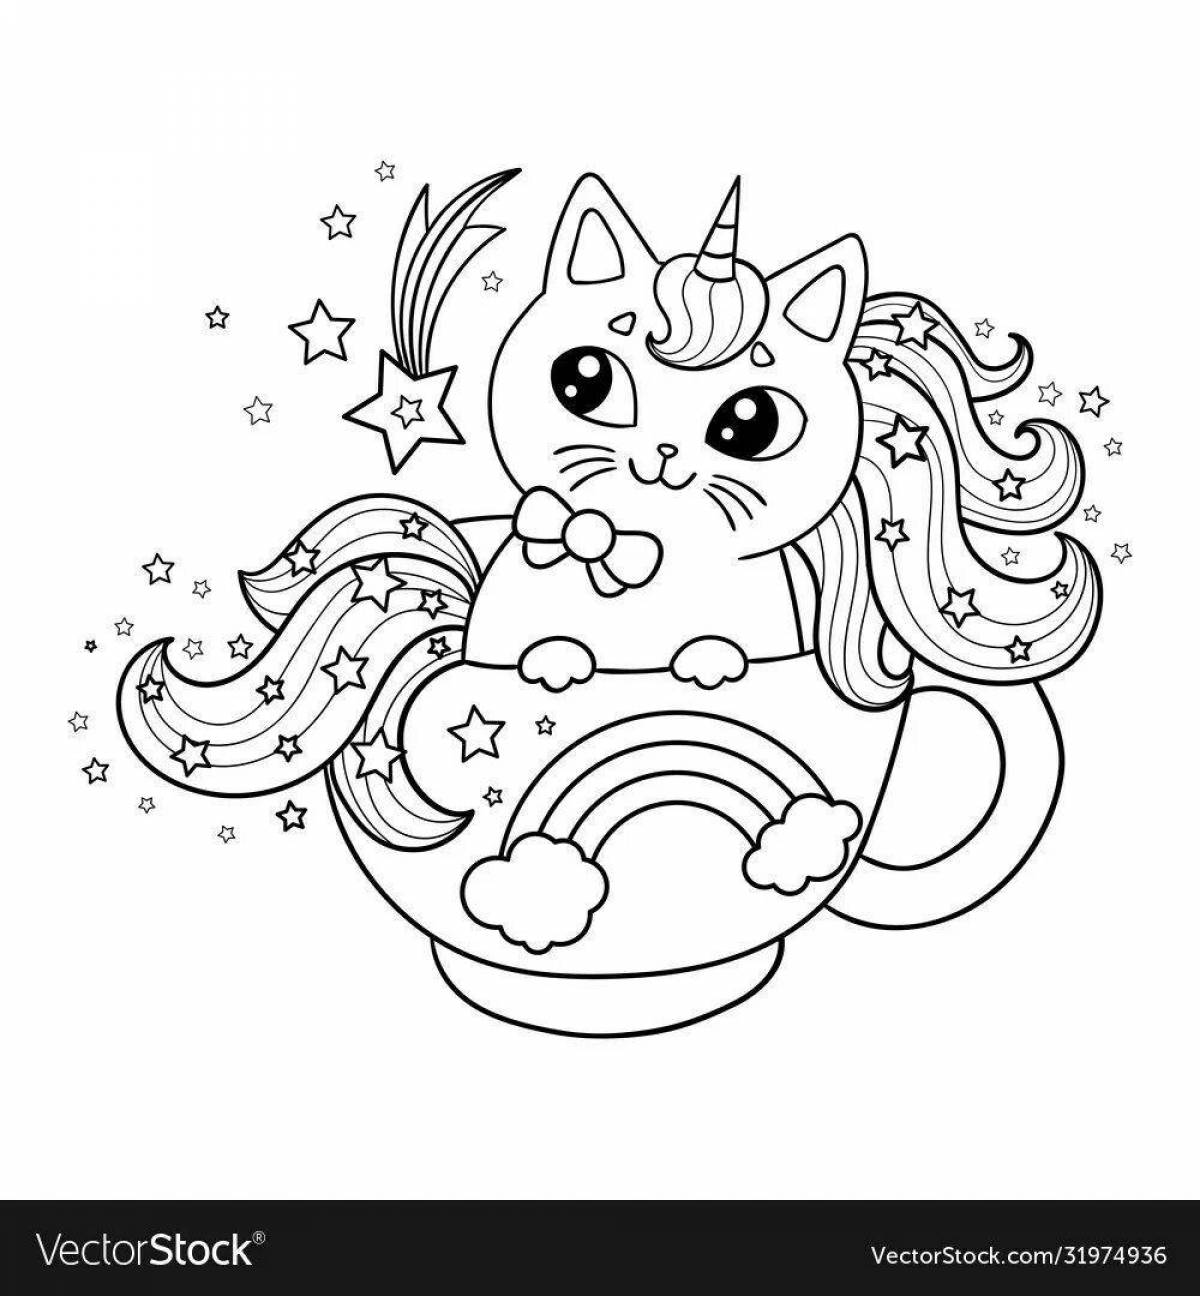 Coloring page adorable cat in a cup